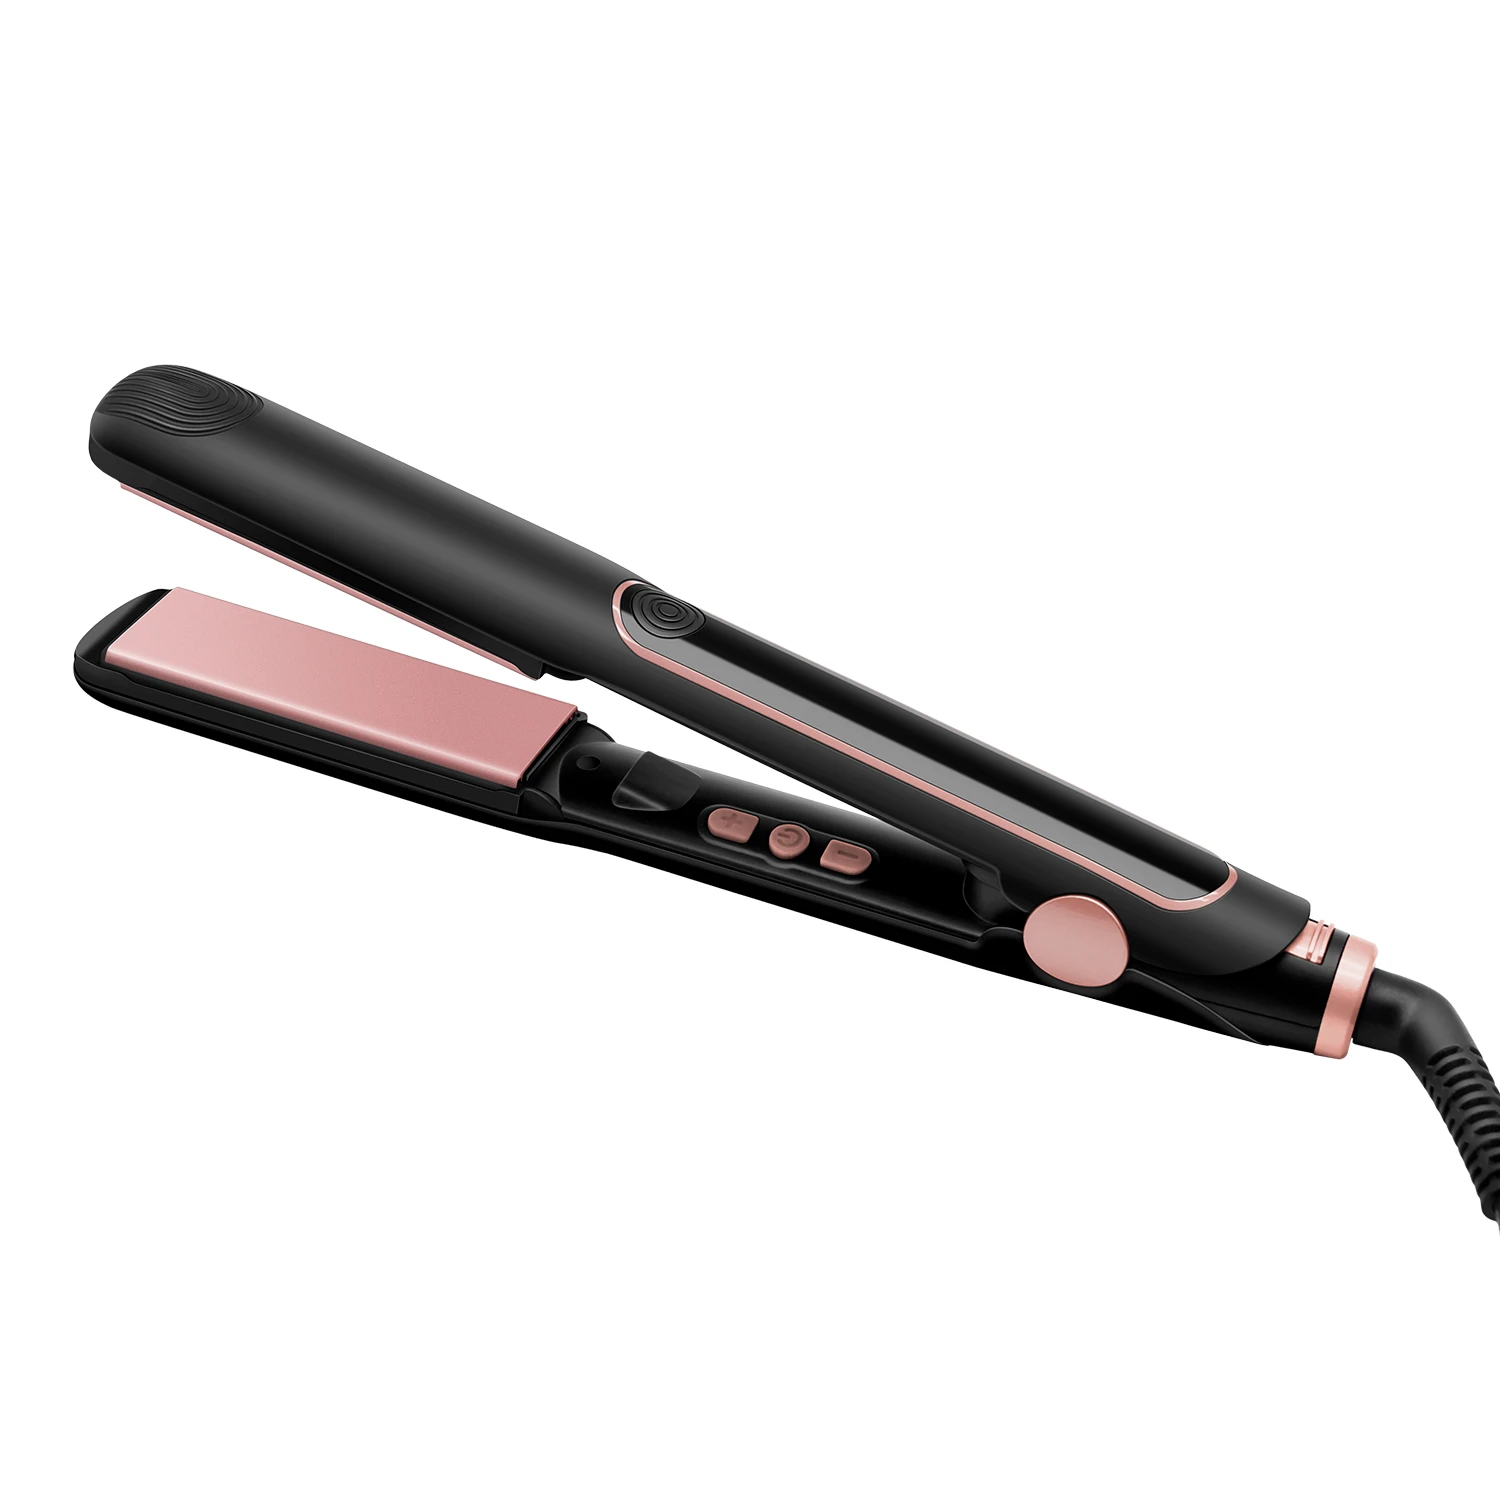 Electronic Professional Hair Iron Hairstyling Mini Portable Ceramic Flat Iron Hair Straightener Irons Styling Tools